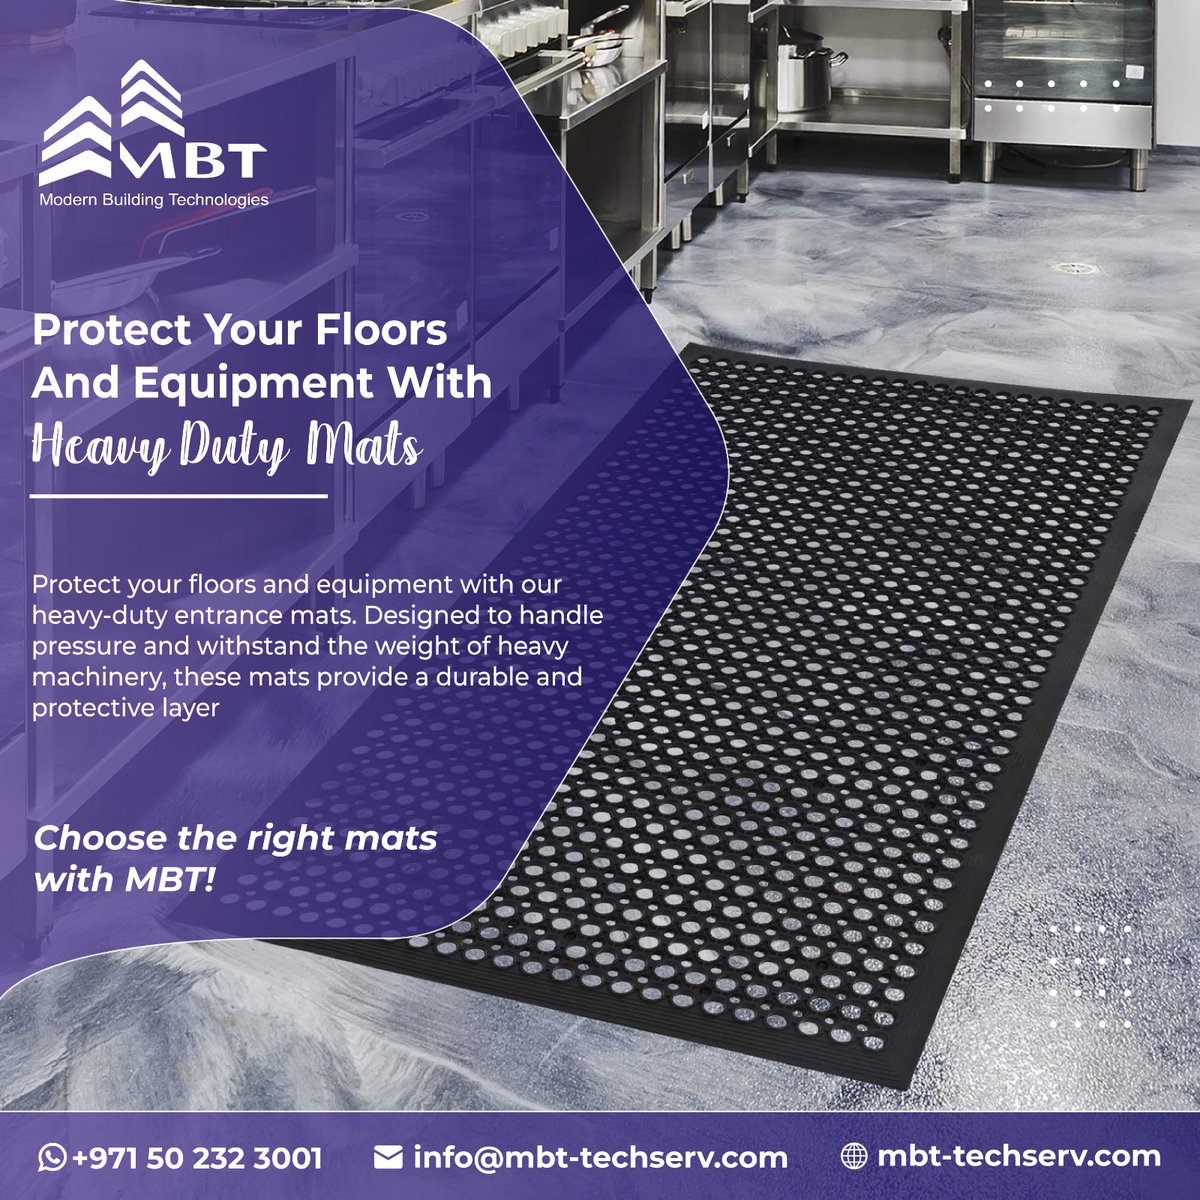 Our Commercial Entrance Mats are engineered with advanced technology to effectively trap dirt, dust, and moisture

Talk To Us On WhatsApp:
wa.me/9710502323001

Or reach us at
+97143462595
info@mbt-techserv.com

#mbt #entrancemats #commercialmats #buildingmaterialsupplier